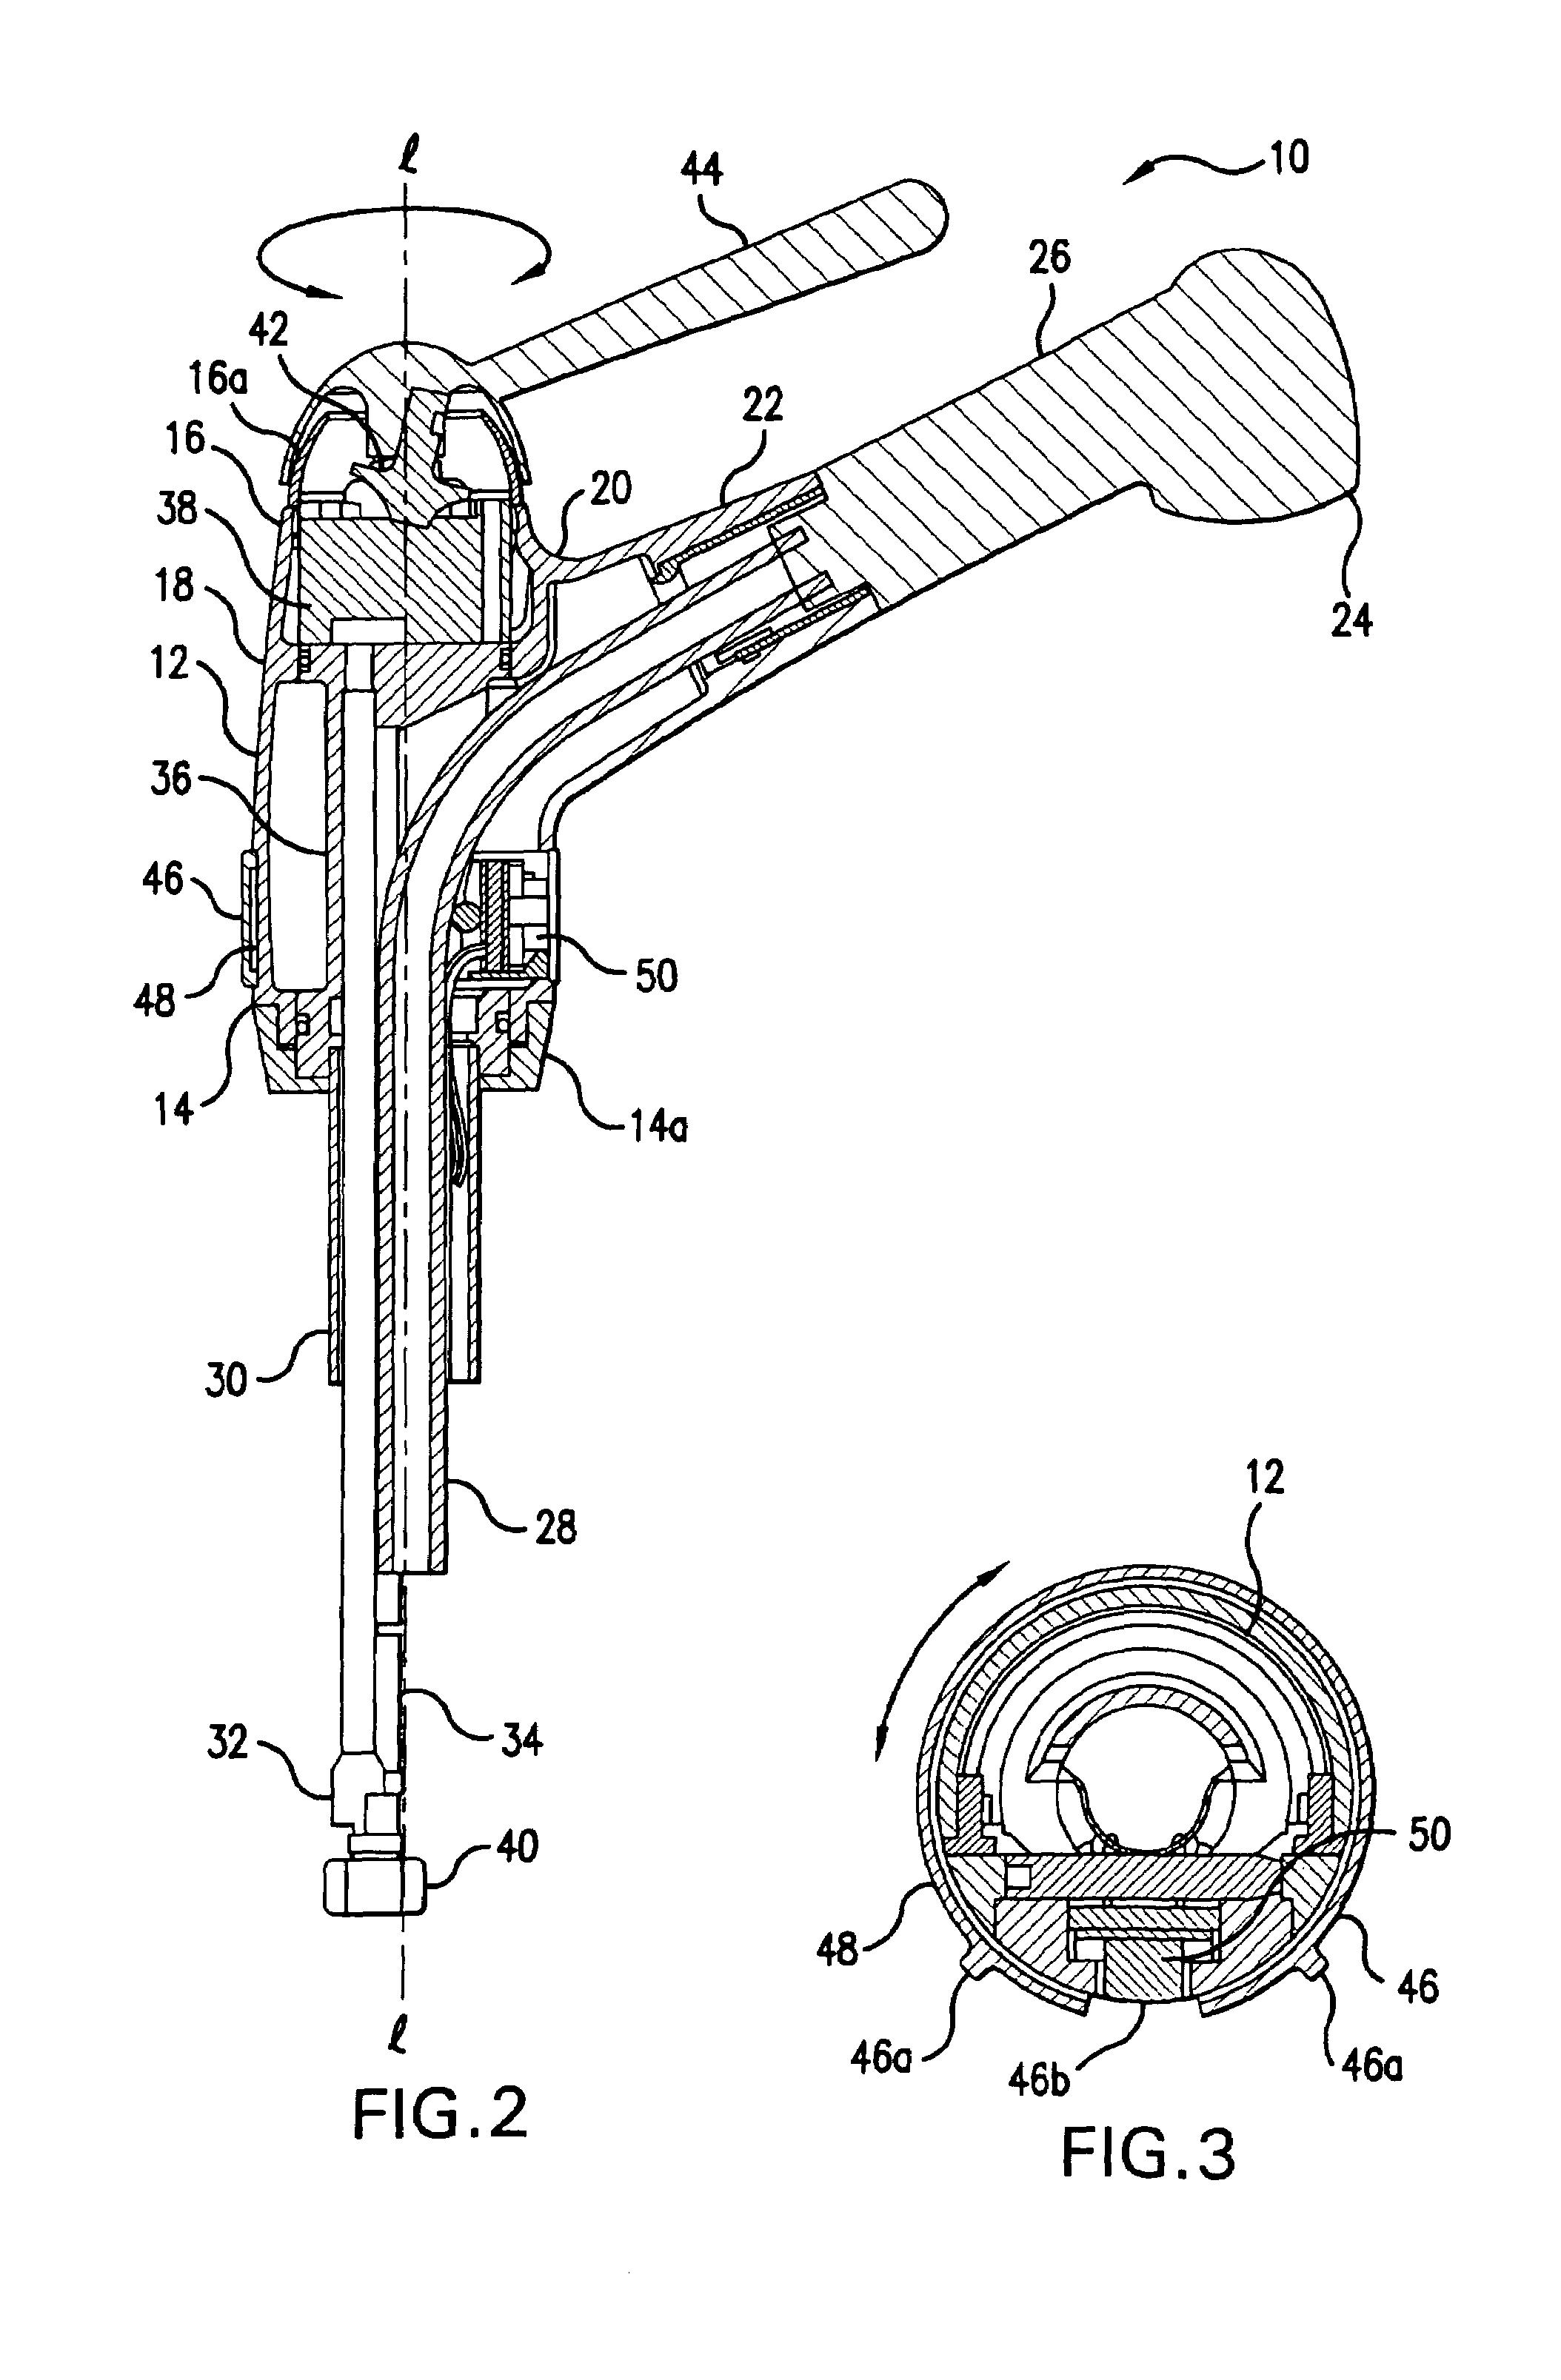 Proximity faucet having selective automatic and manual modes